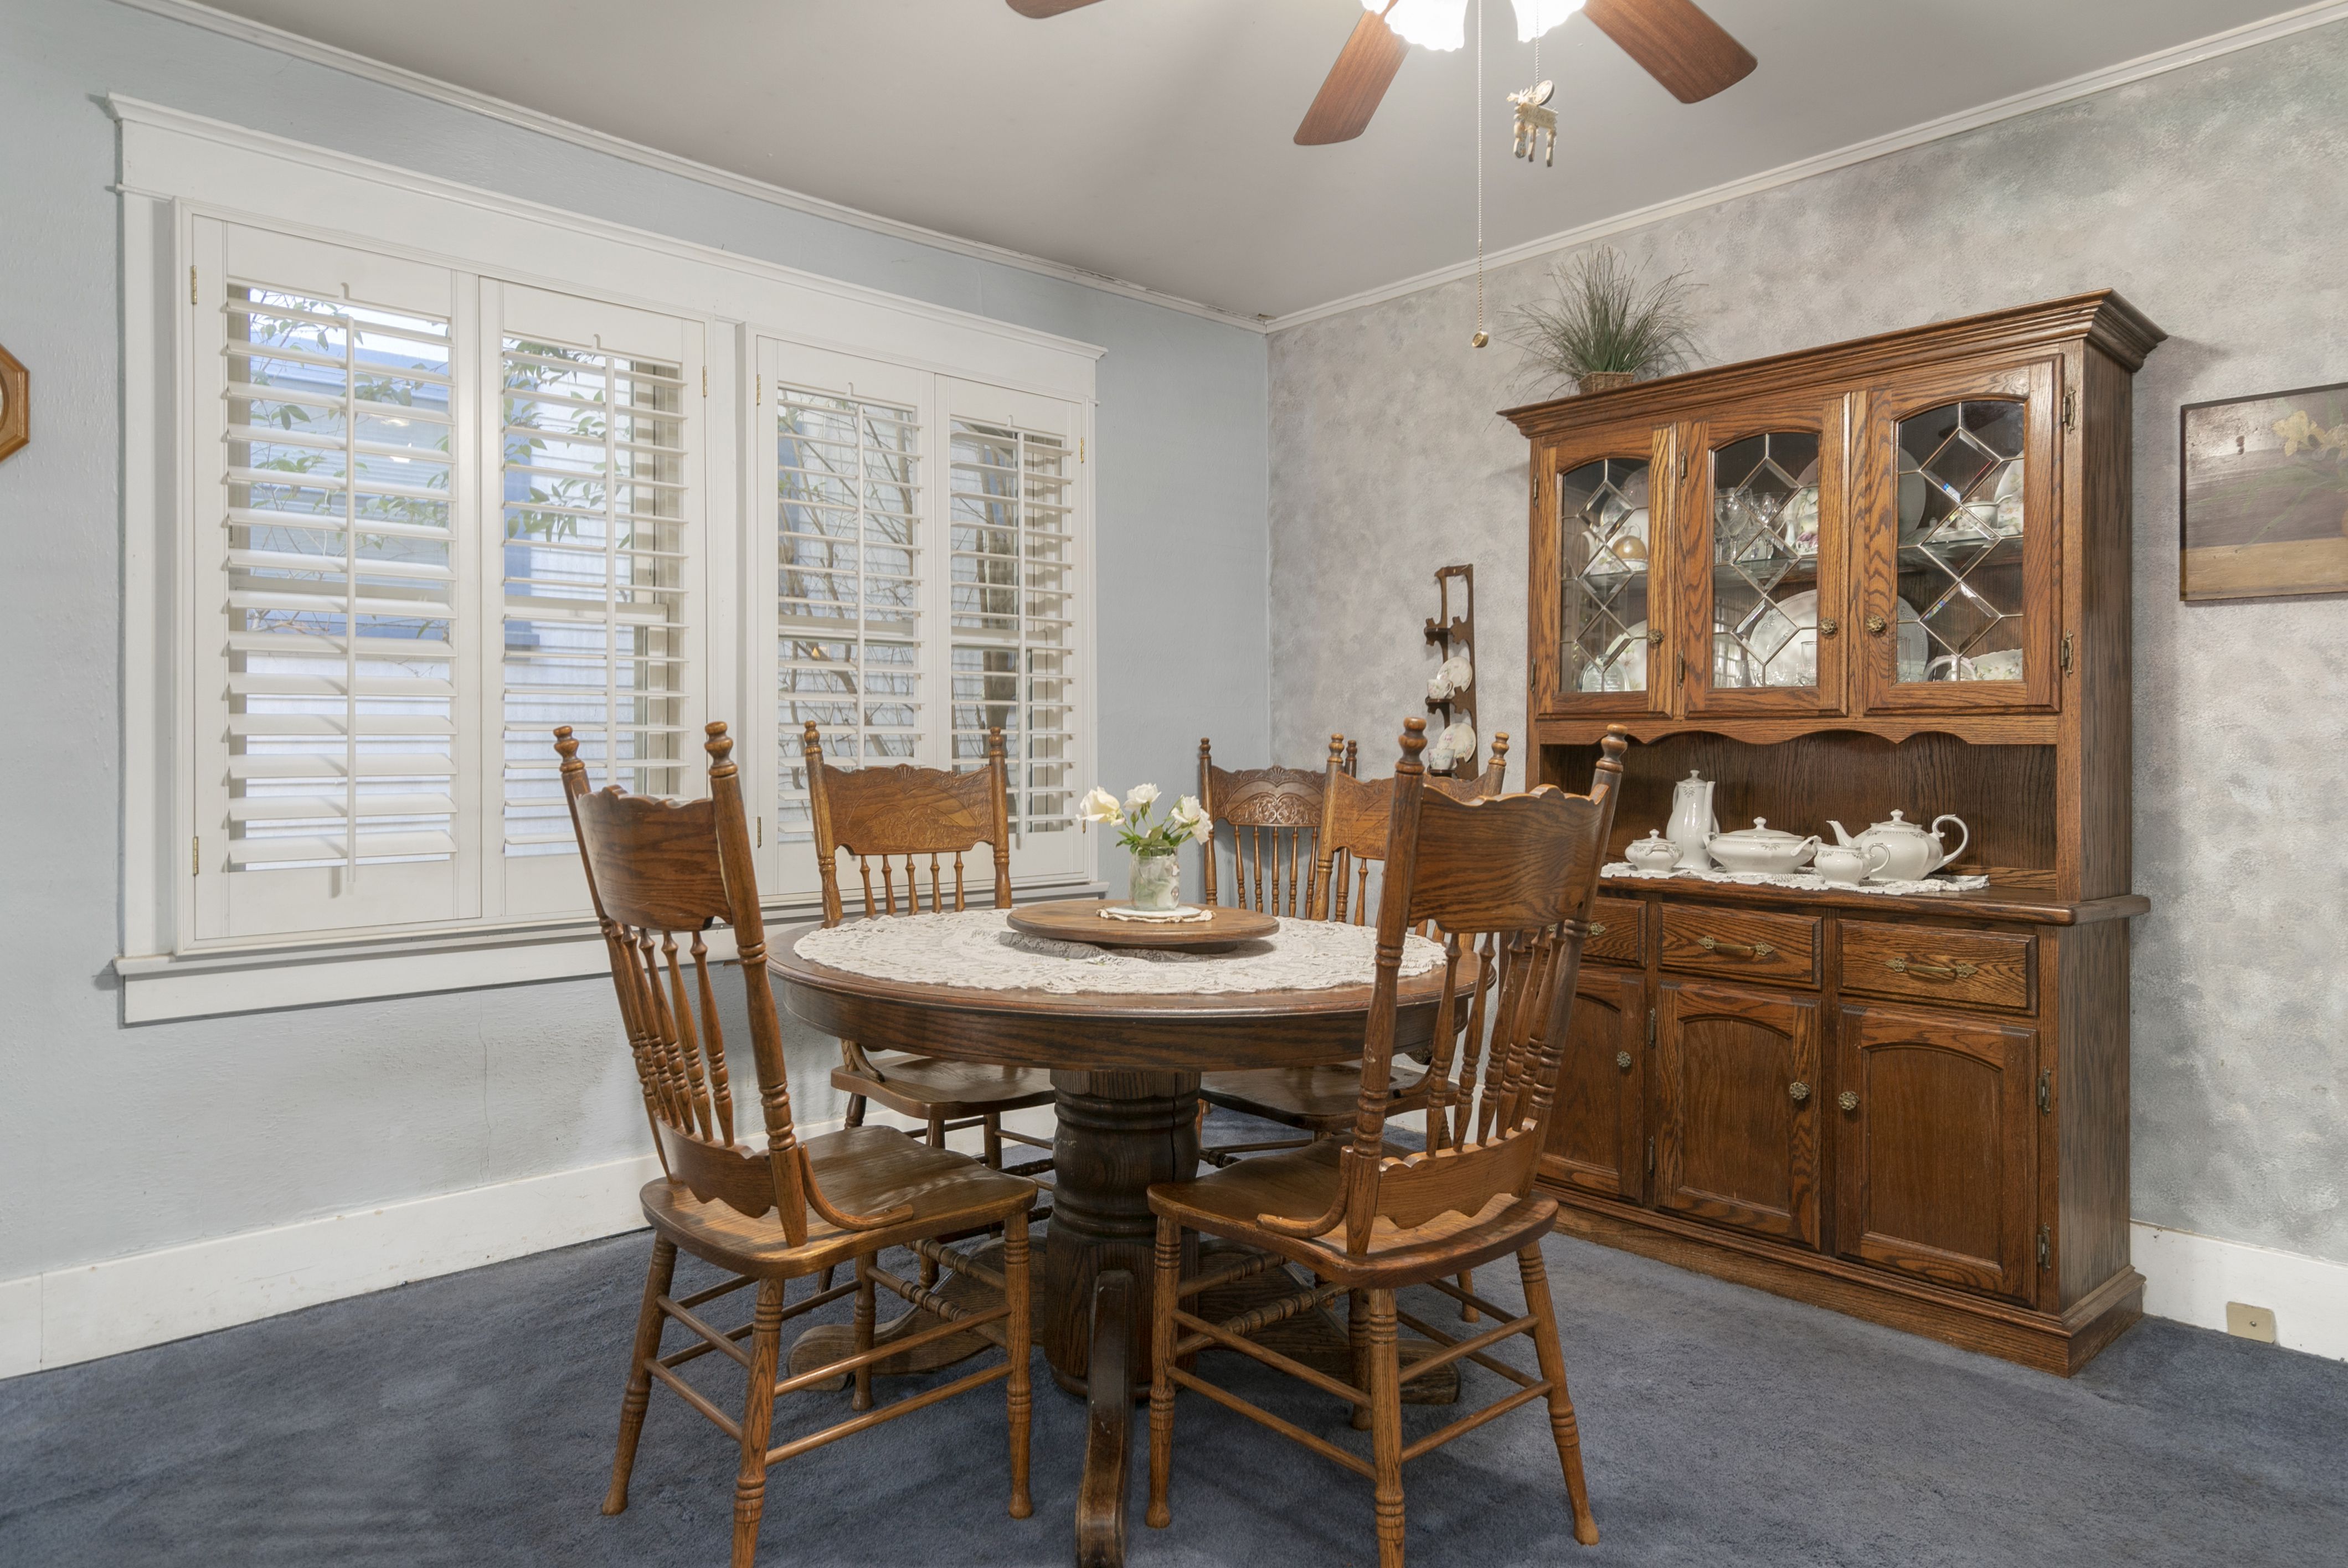 Formal dining area with ceiling fan and plantation shutters over double pane windows.